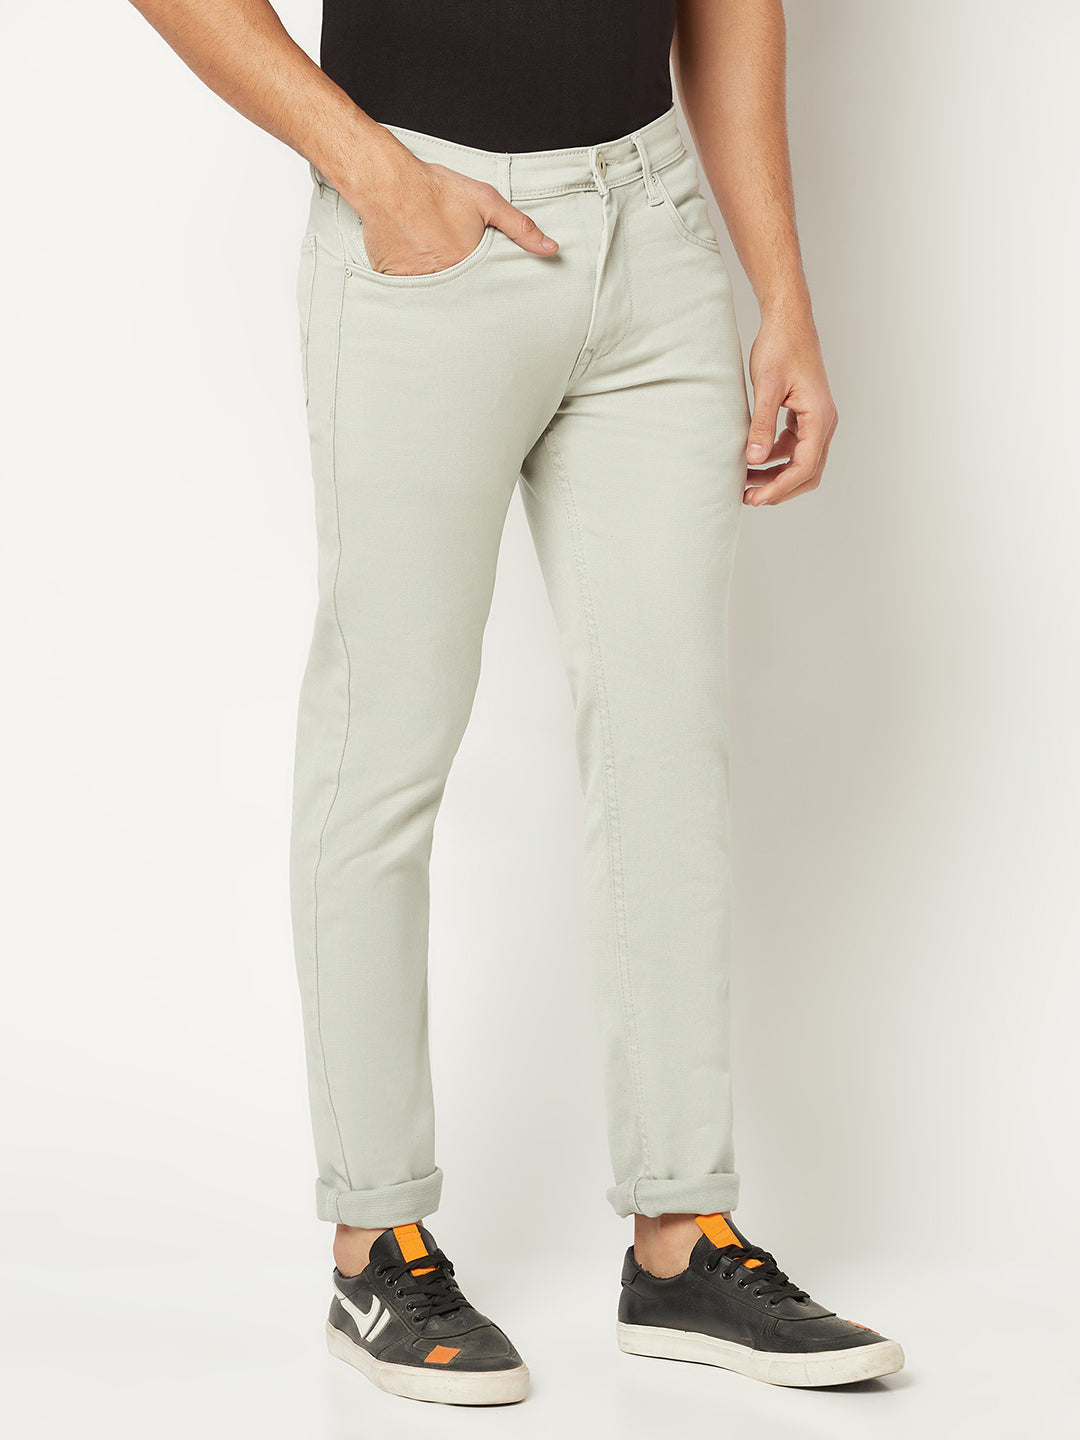 The Drake Jeans in <br> Steel Grey